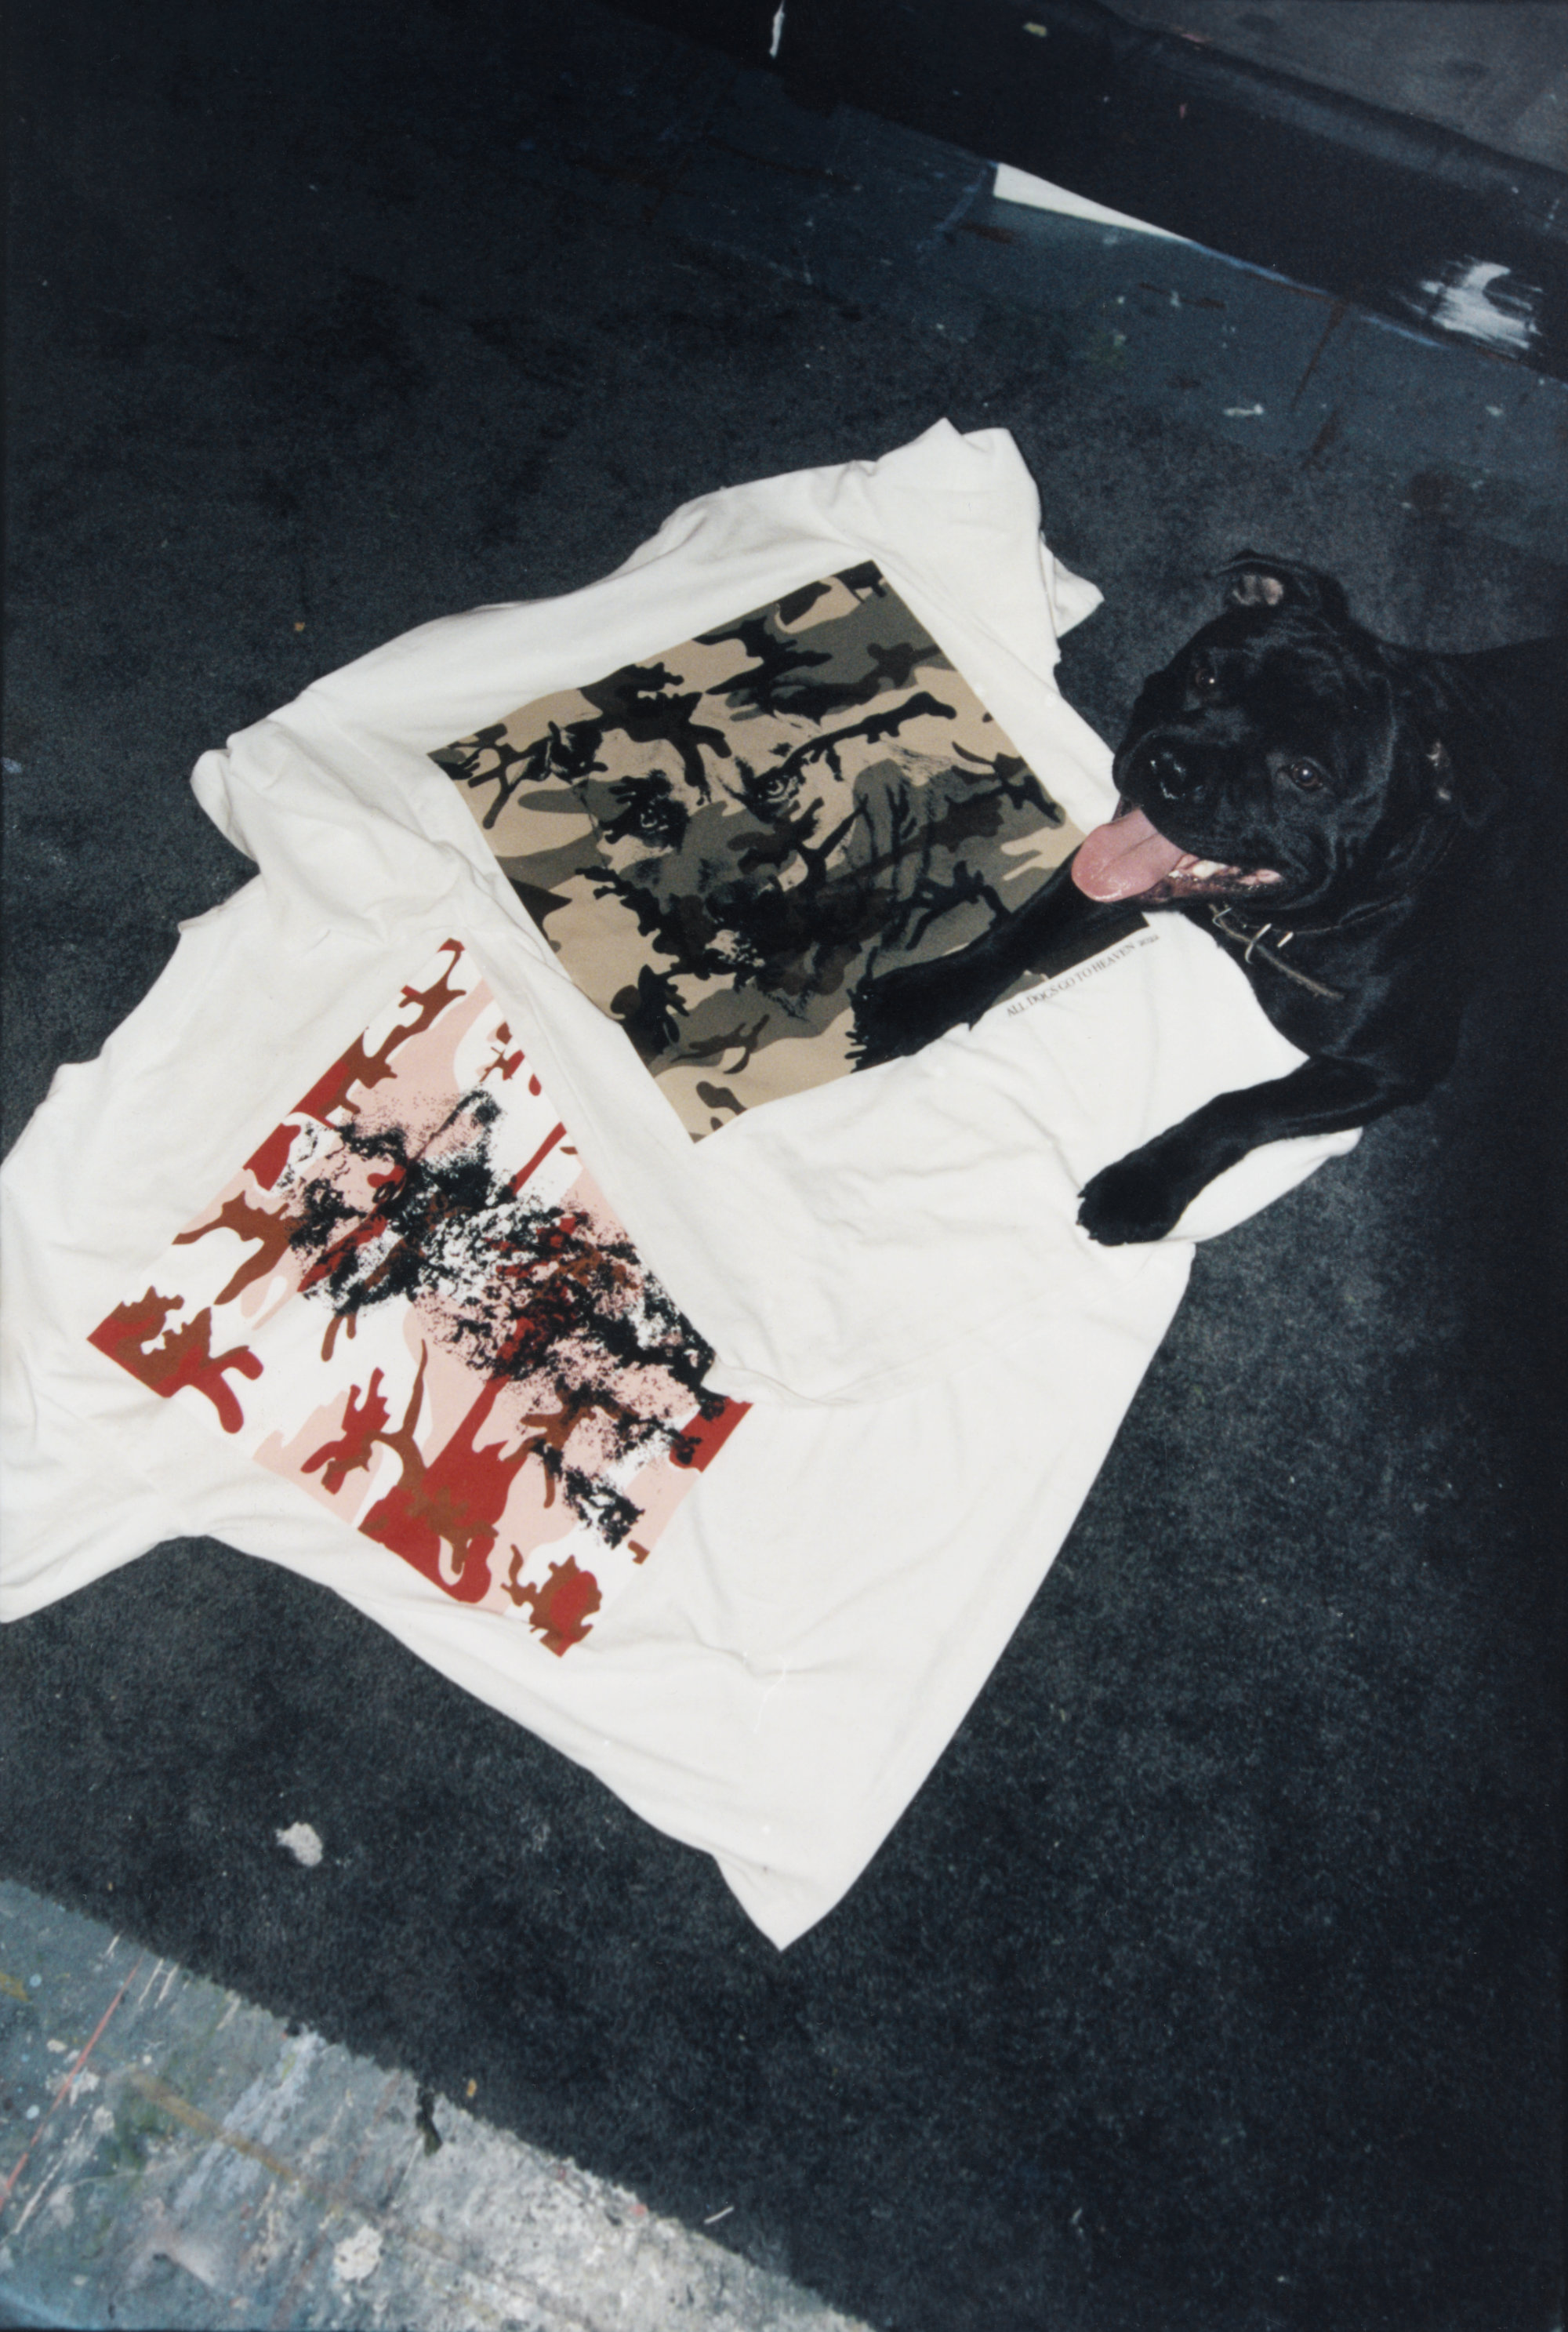 Awake NY & SOLDIER Launch 'All Dogs Go To Heaven' Collection